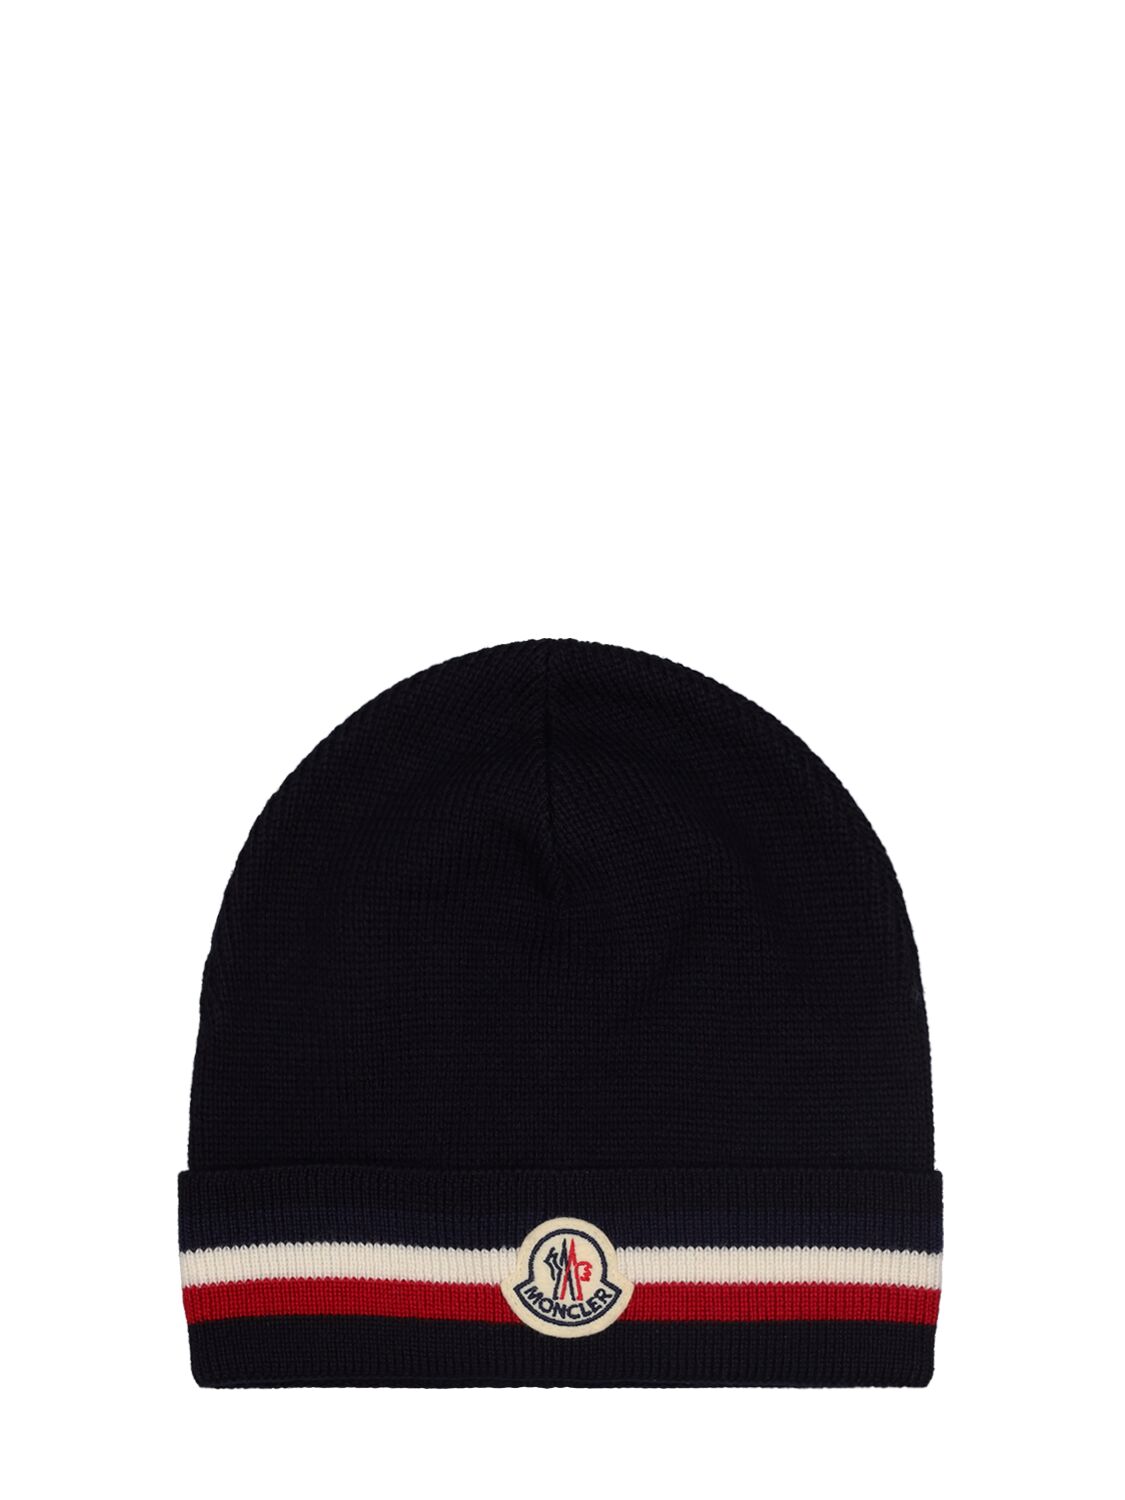 Extrafine Wool Tricolor Beanie